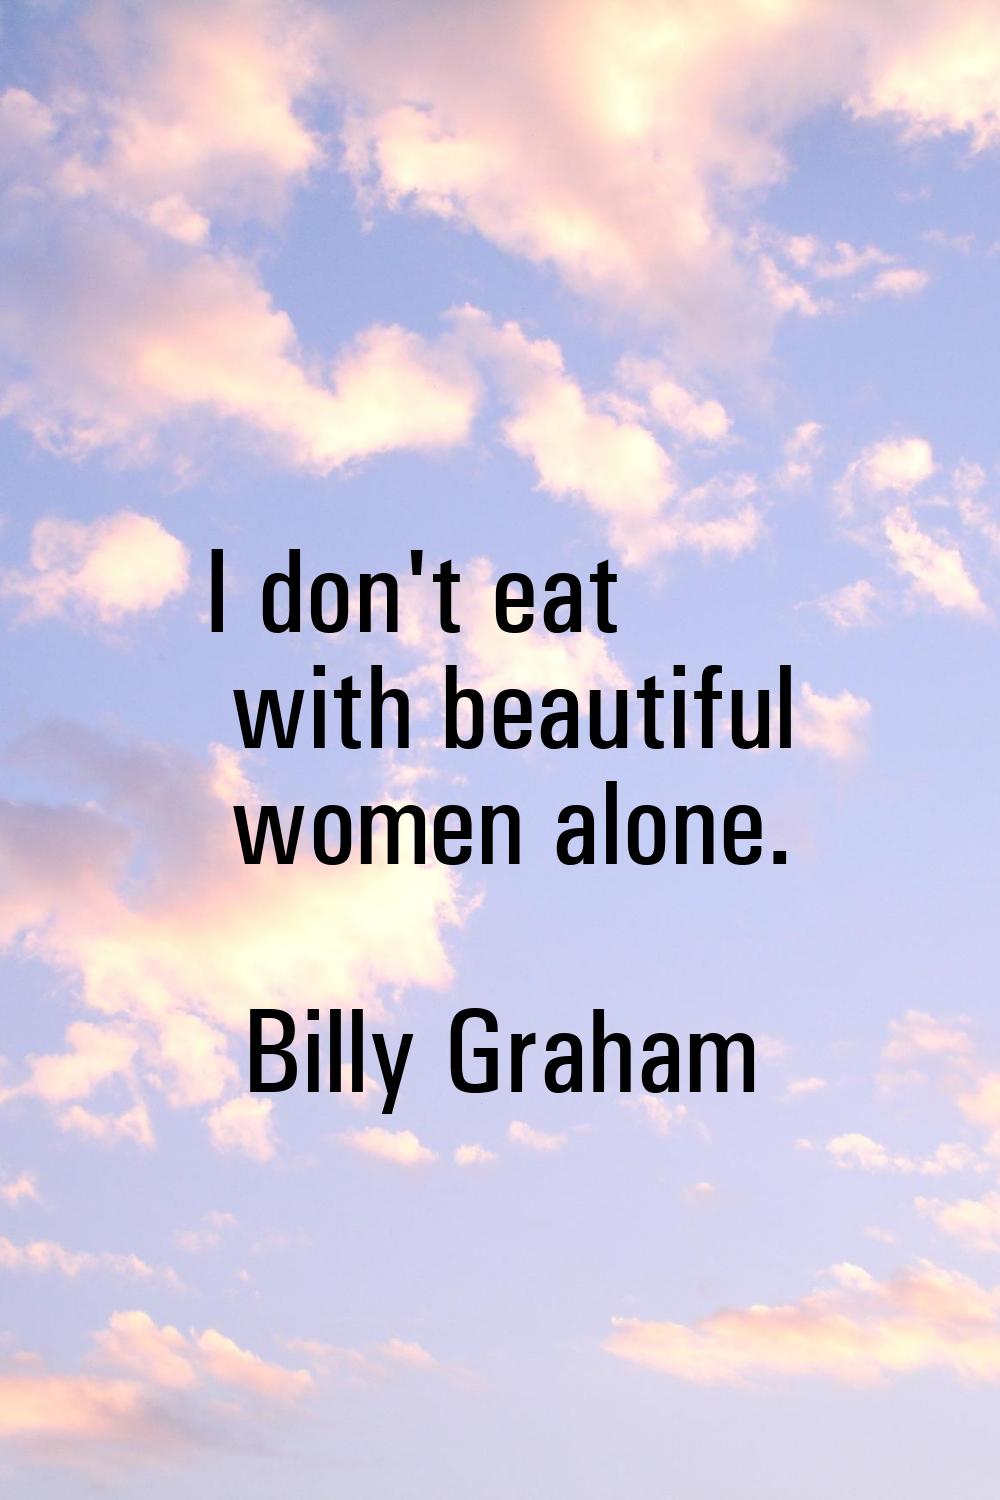 I don't eat with beautiful women alone.